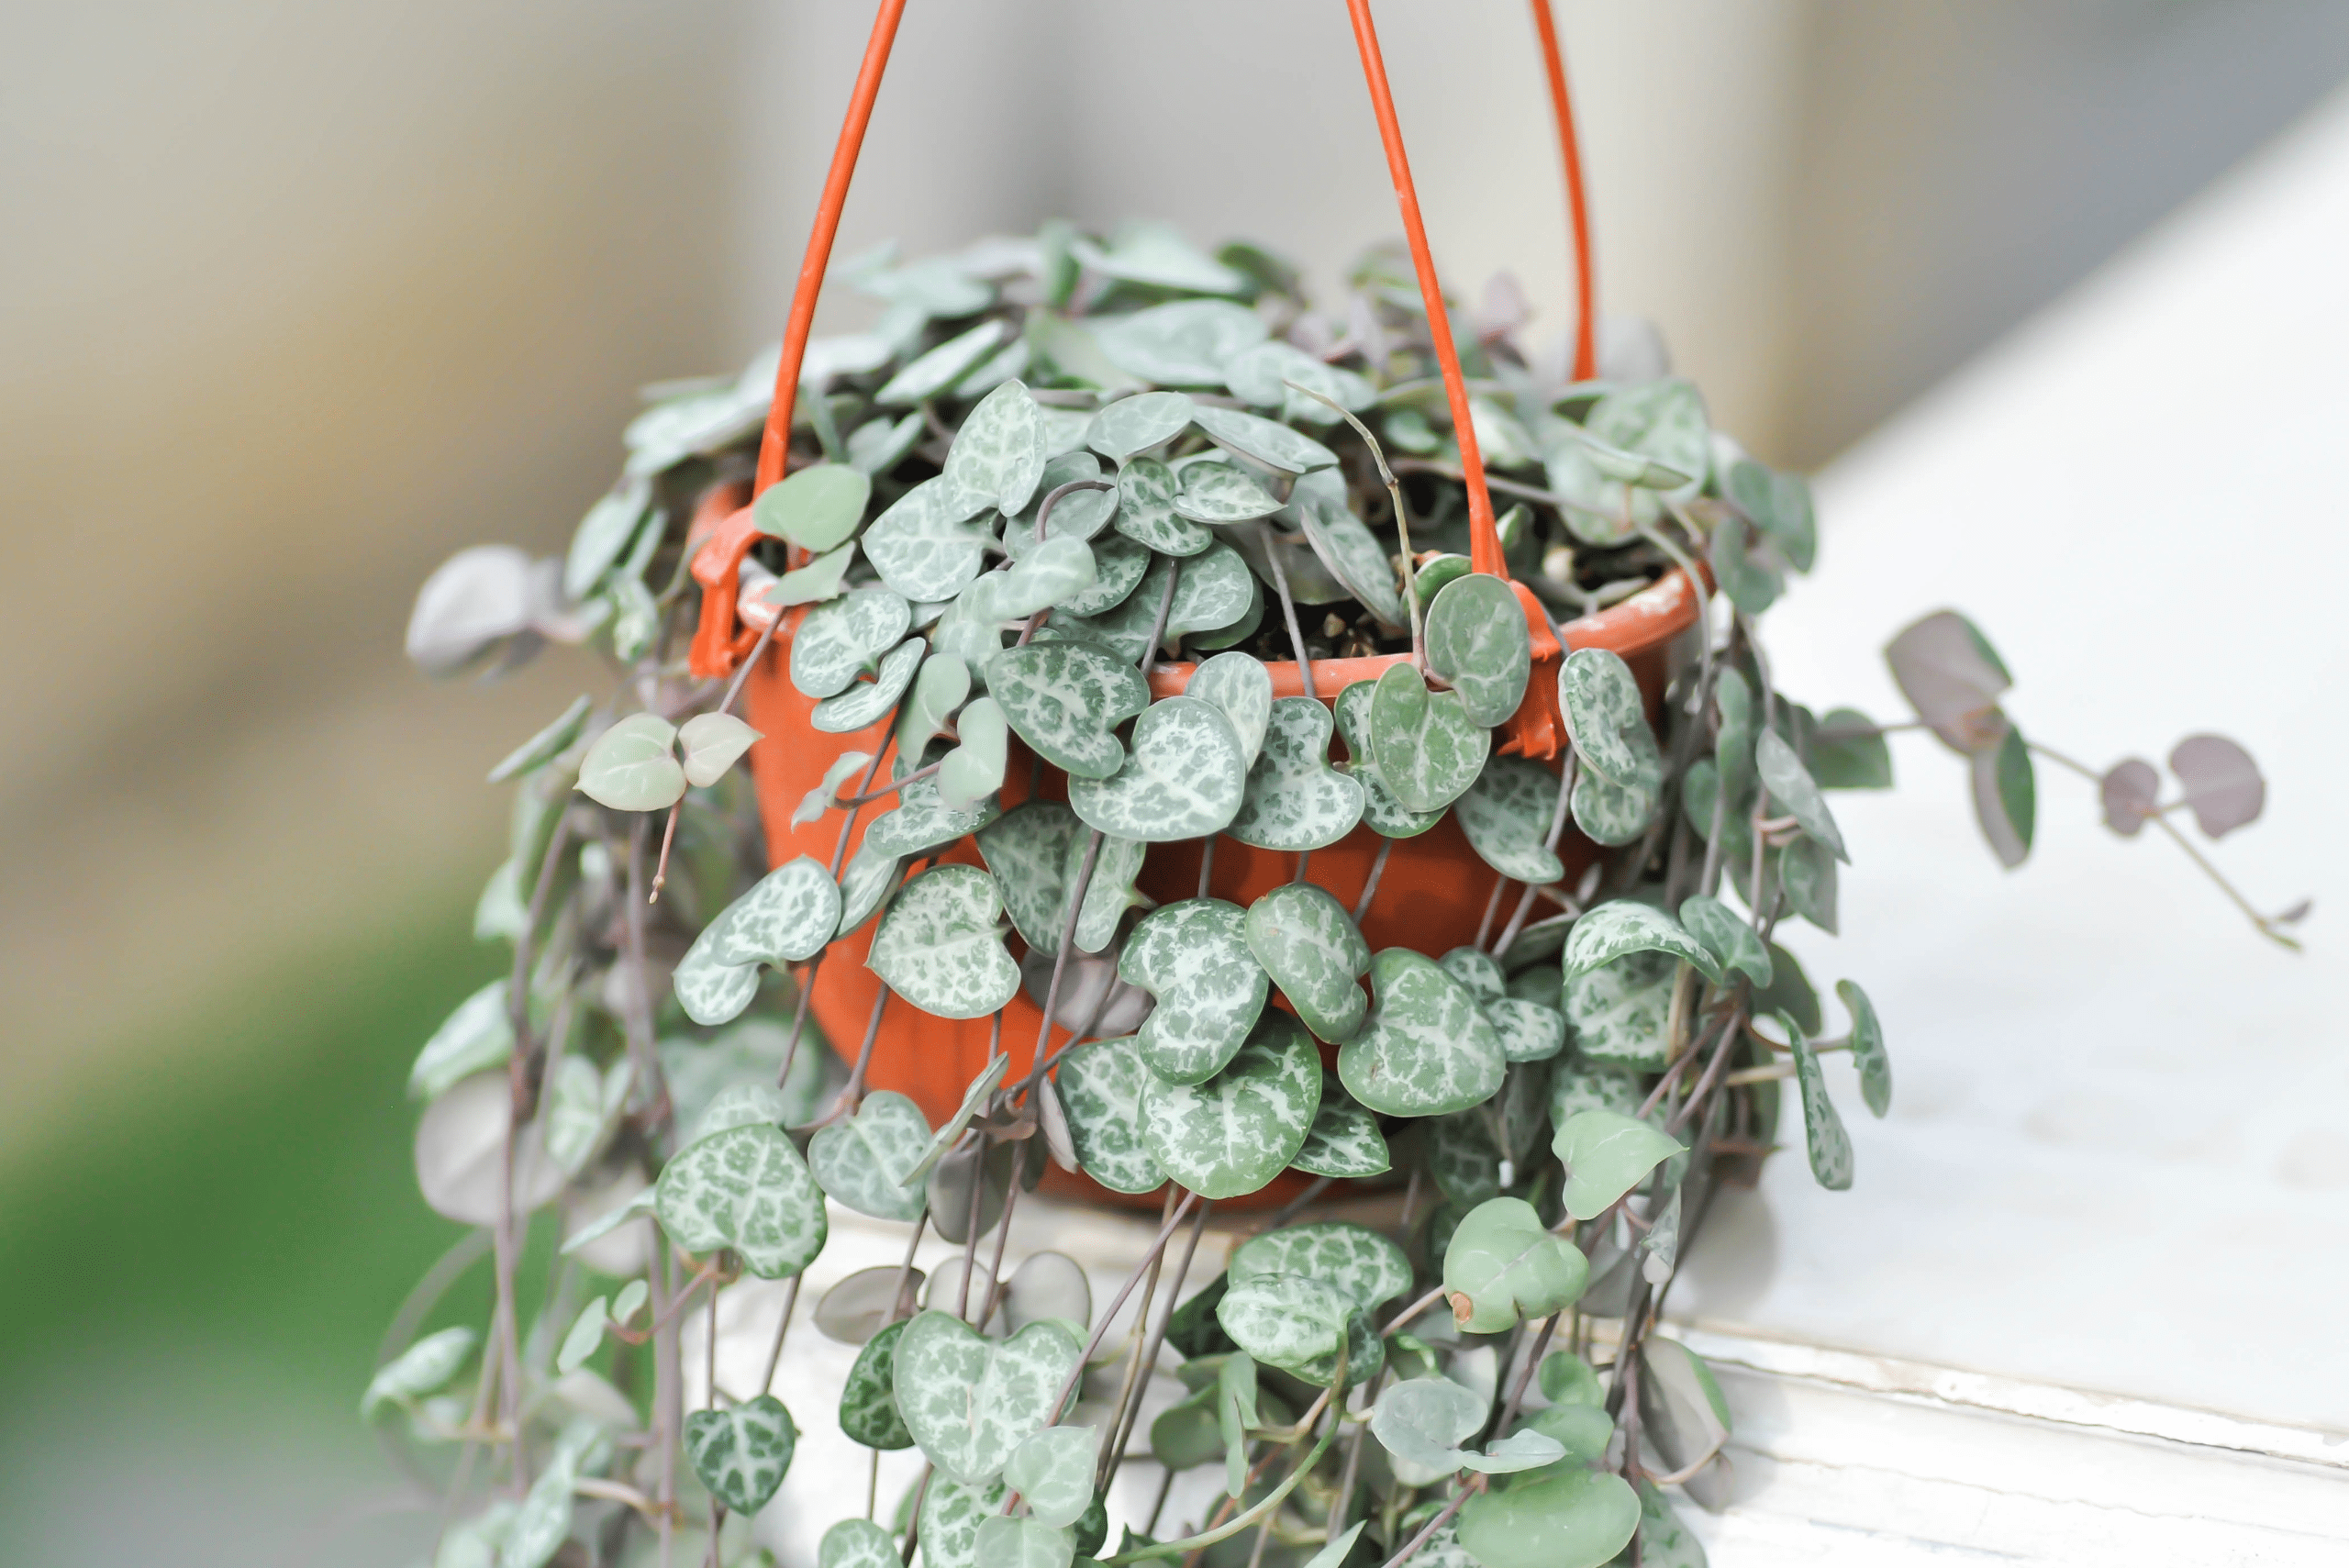 String of Hearts plant in an orange hanging pot